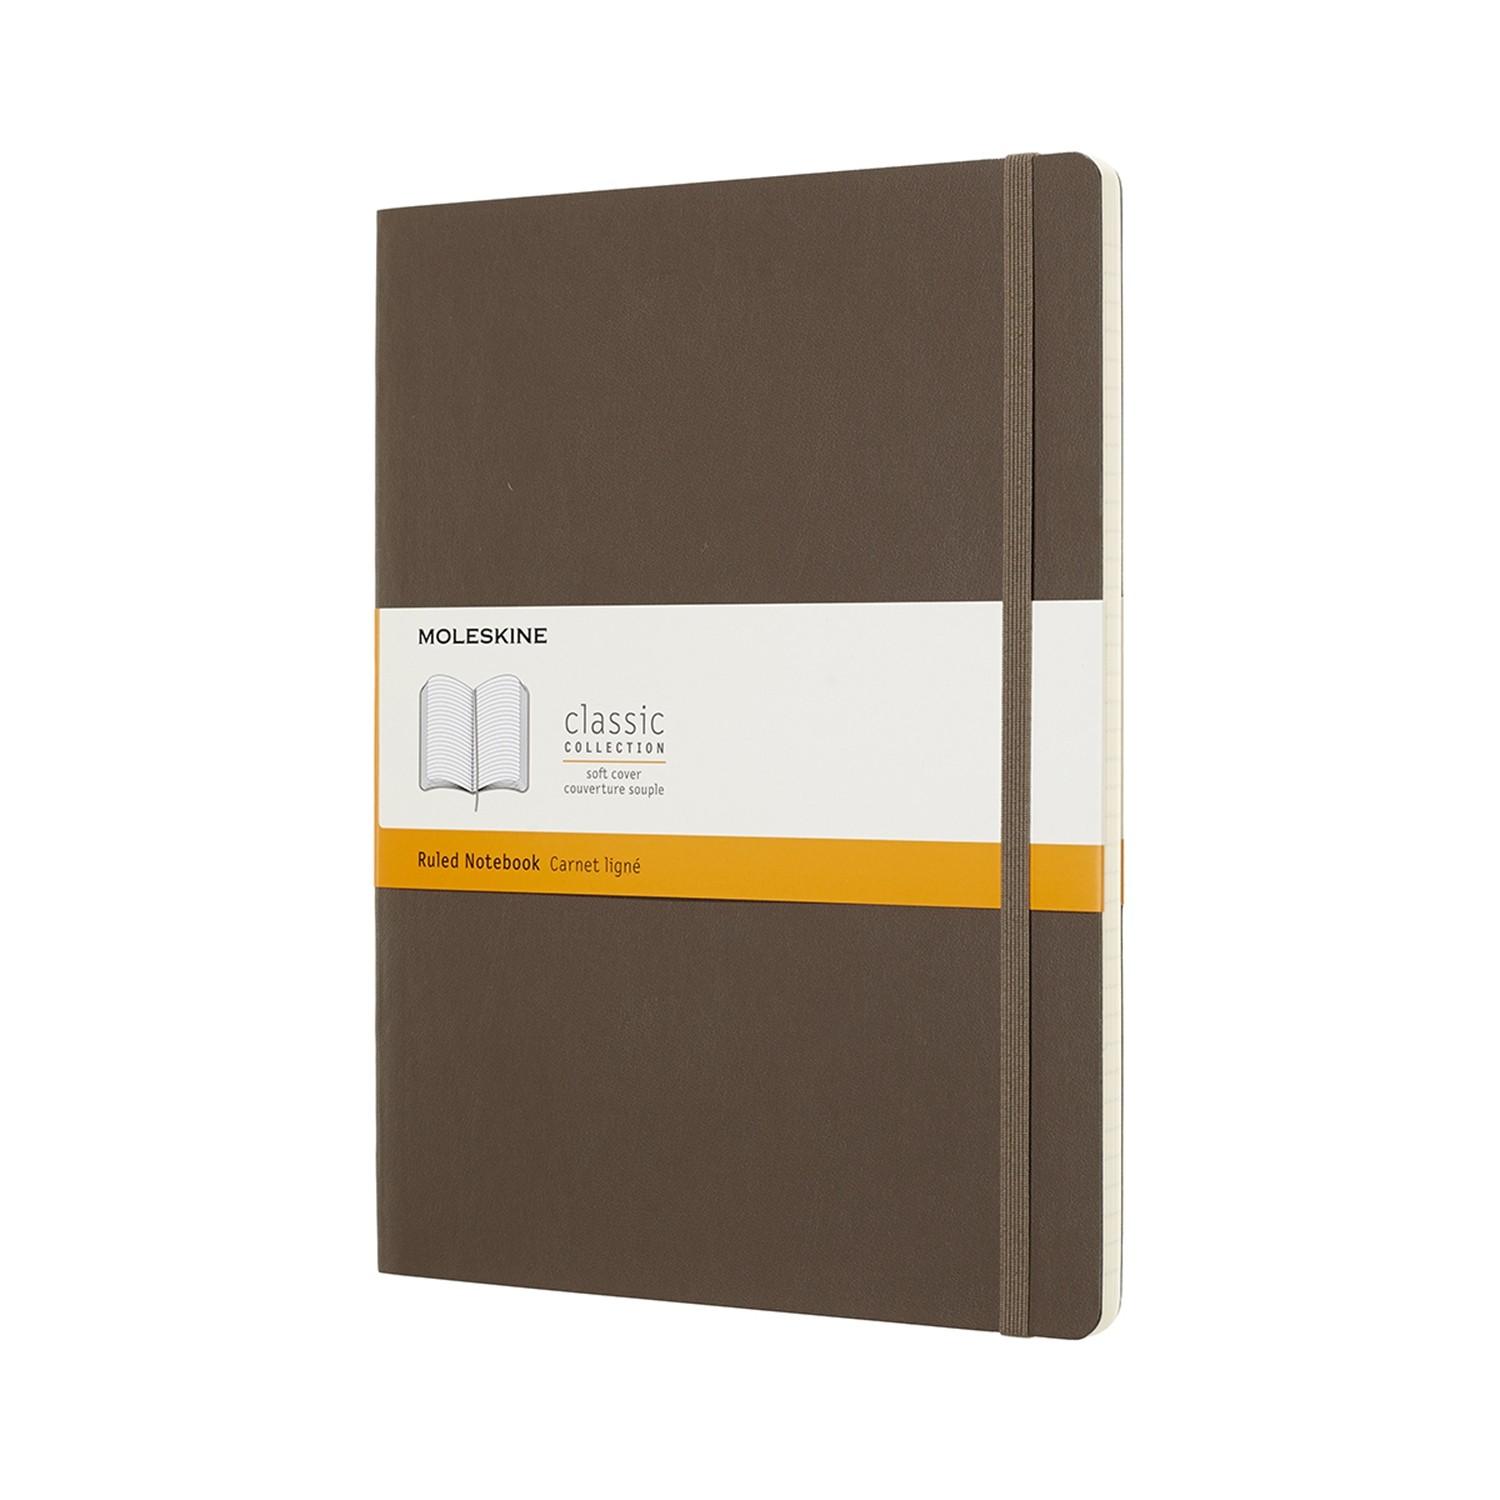 Moleskine Notebook Xlarge Ruled Earth Brown Soft COVER